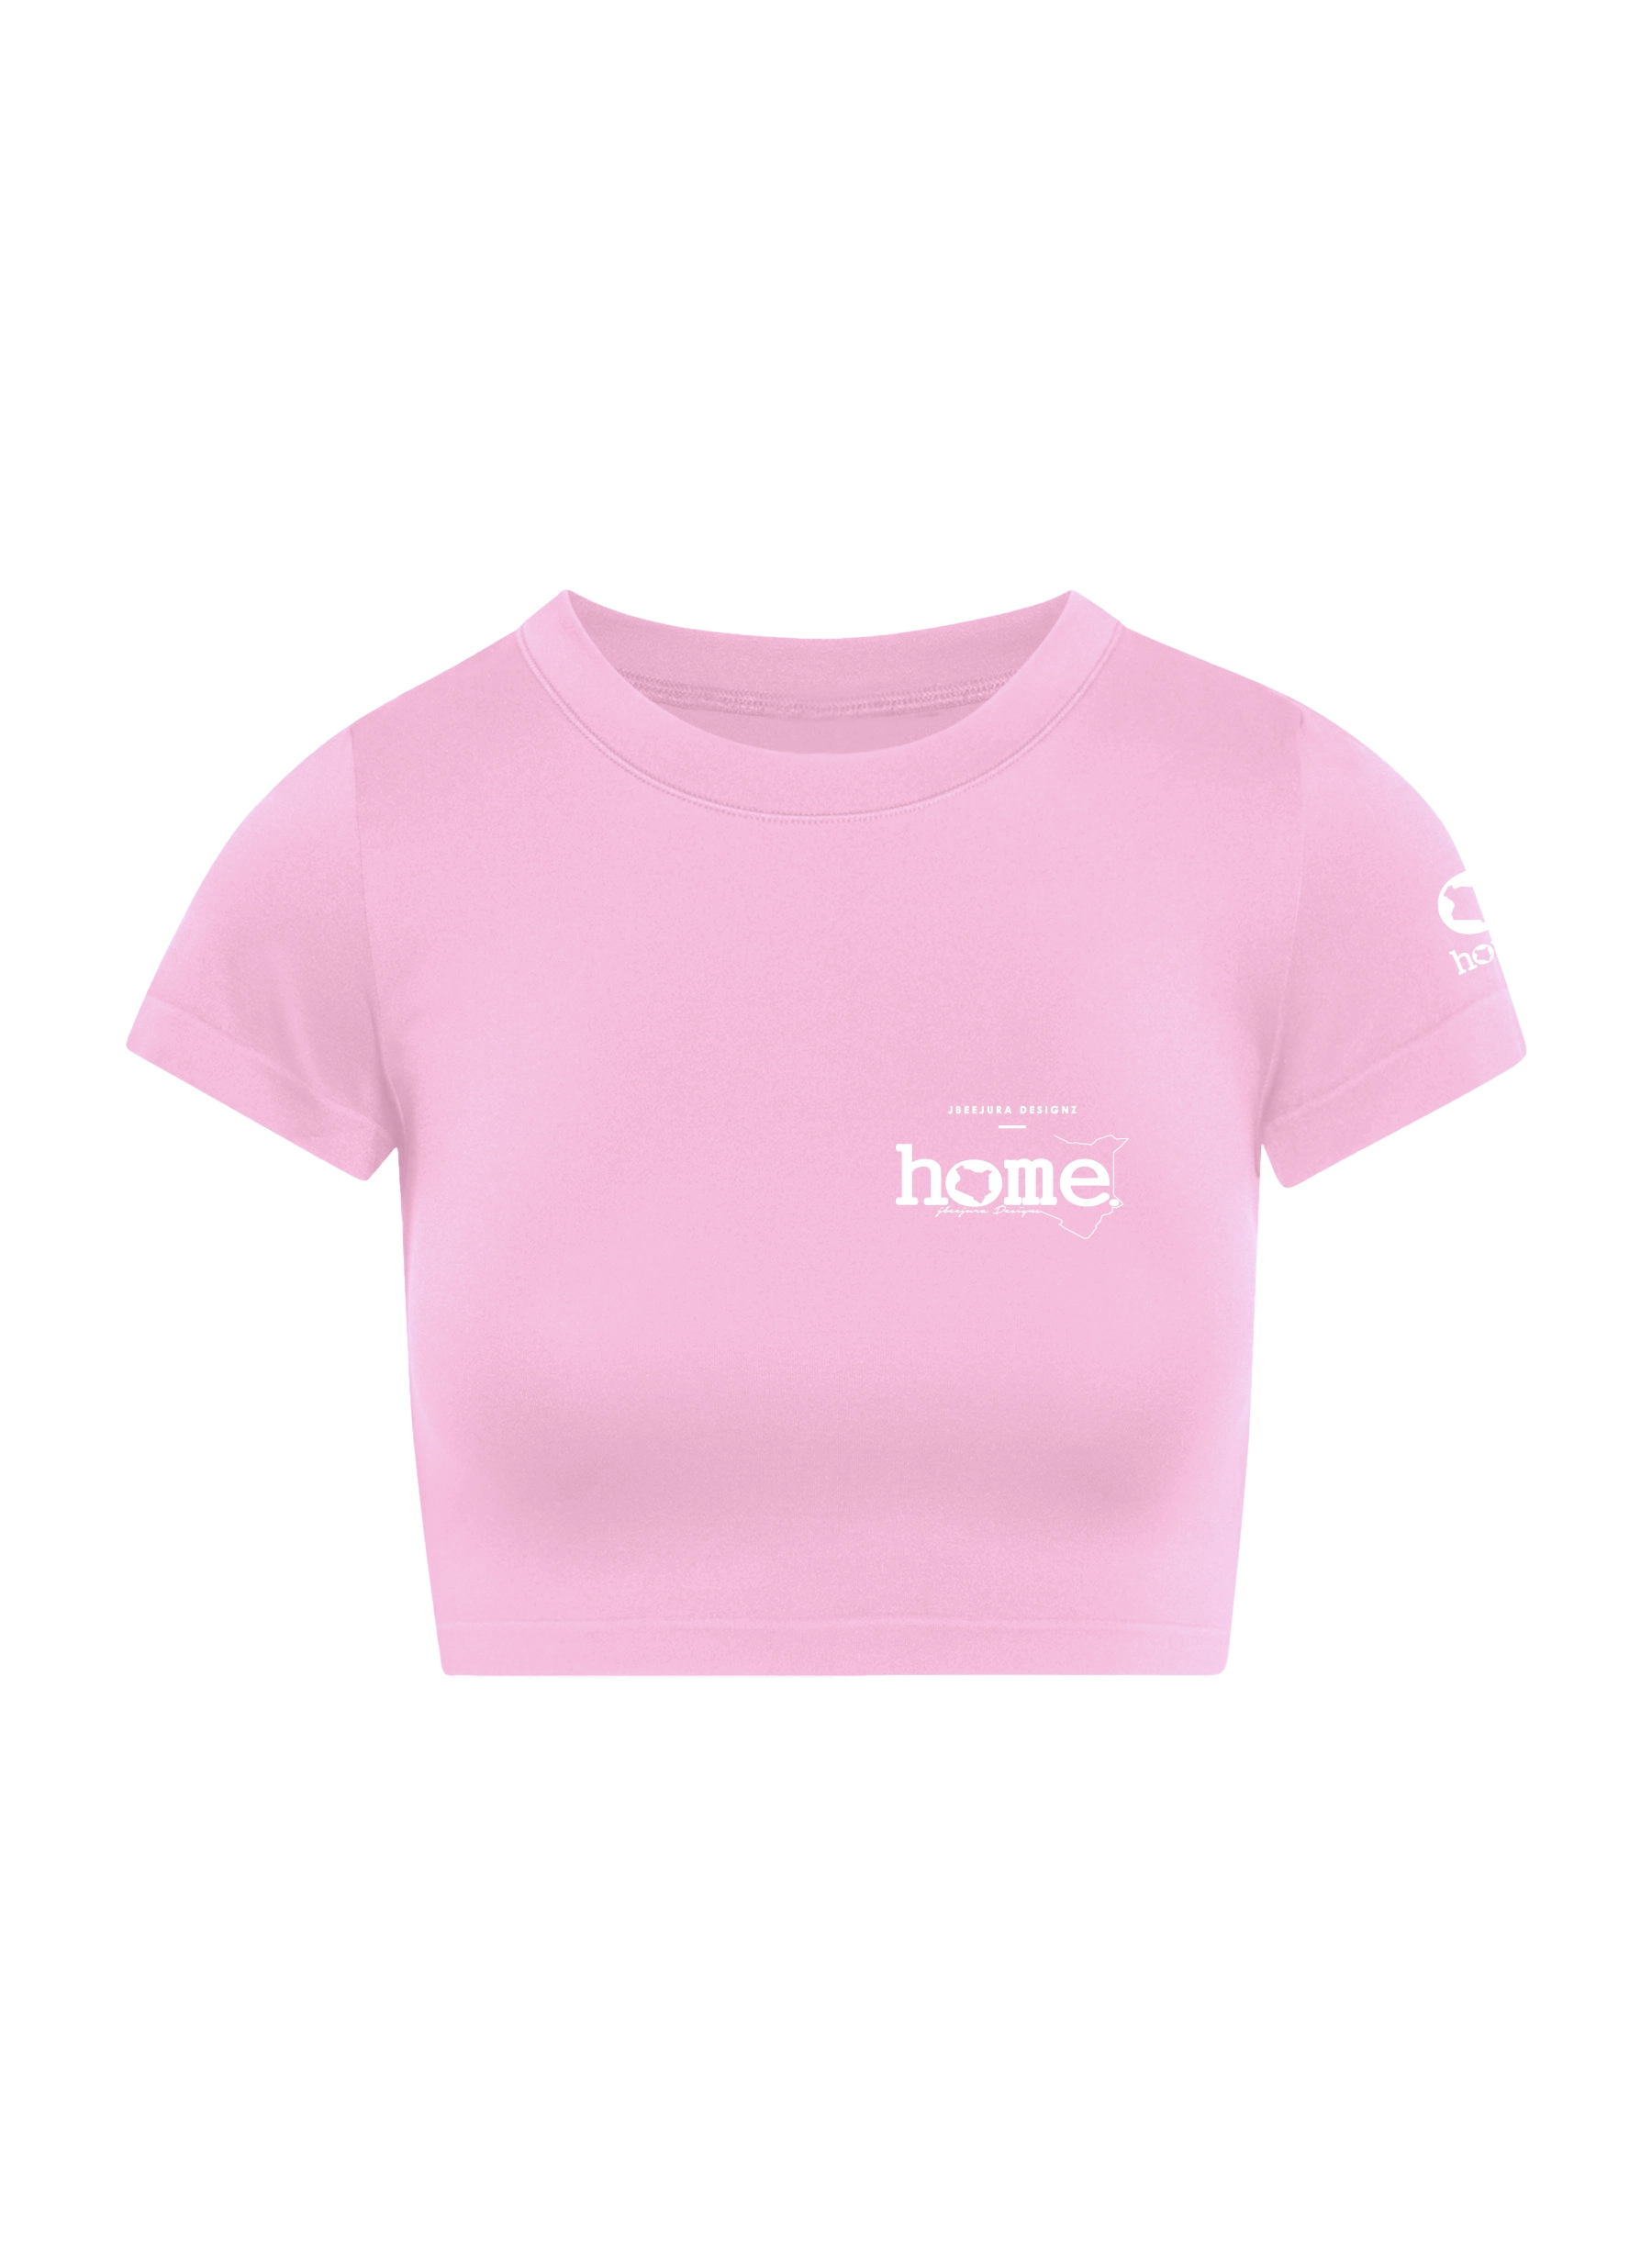 home_254 SHORT SLEEVED PINK CROPPED ARIA TEE WITH A WHITE 3D WORDS PRINT 